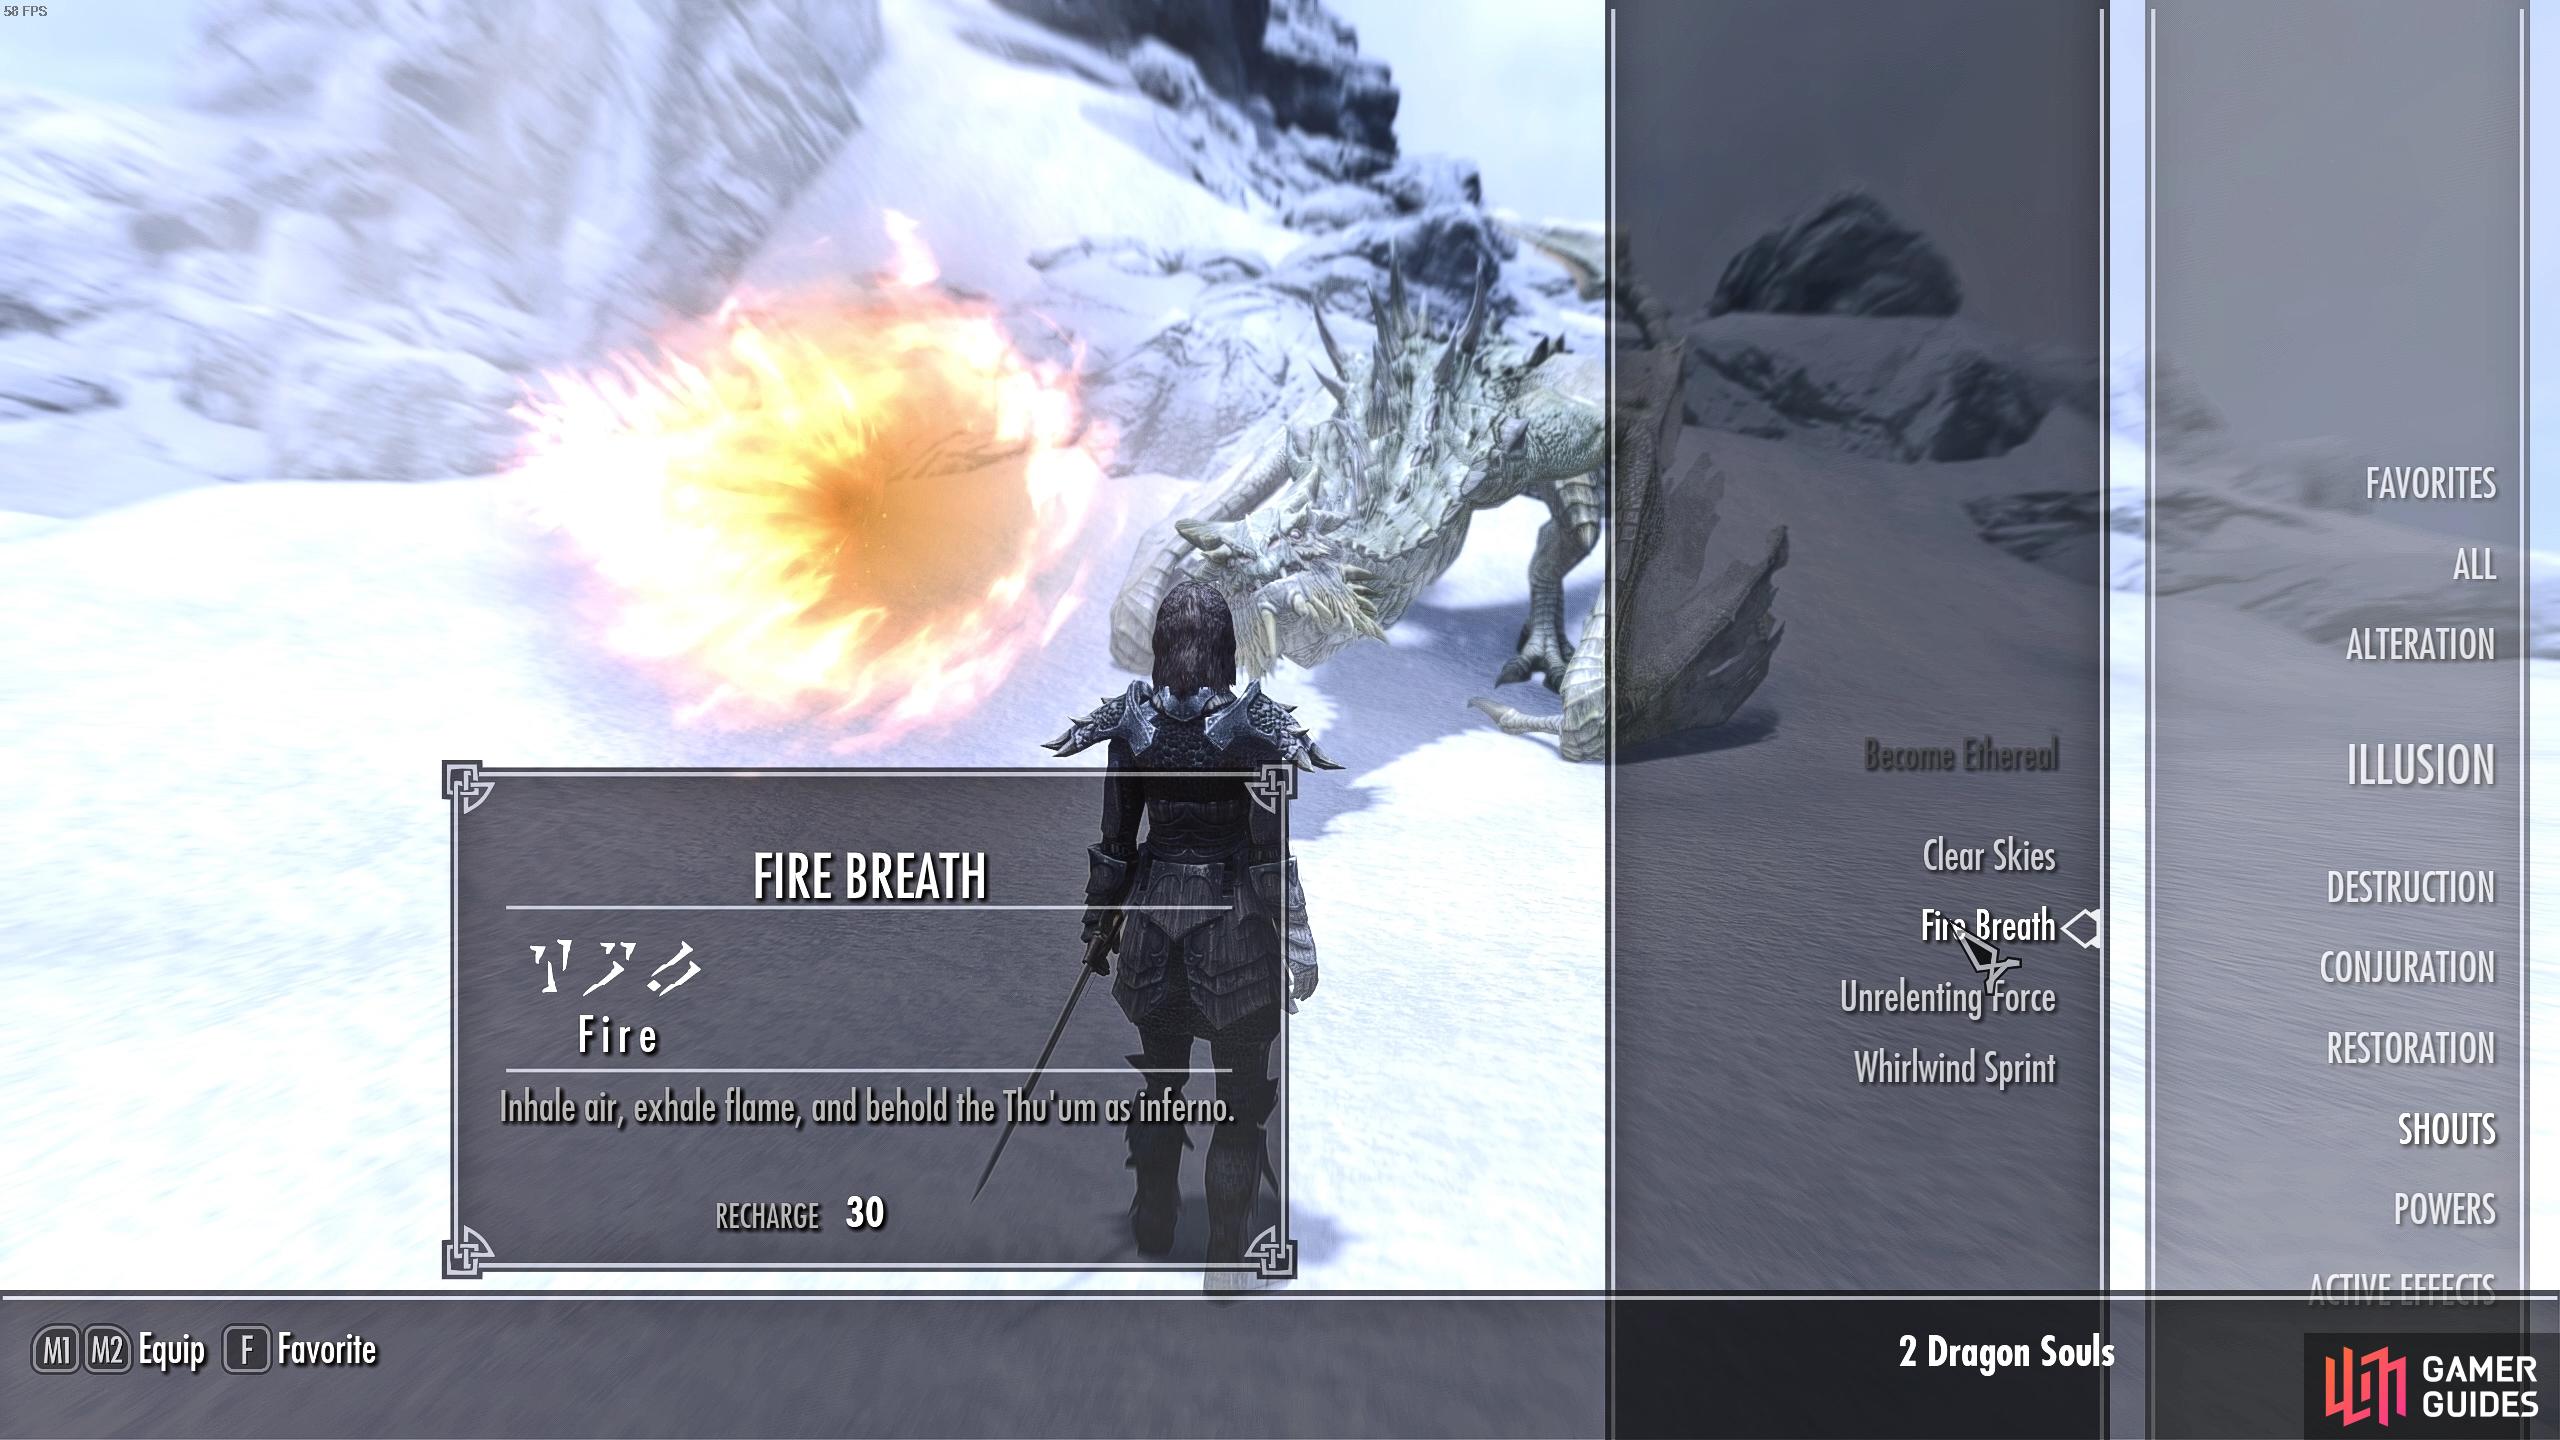 Use Fire Breath on Paarthurnax to advance the quest.